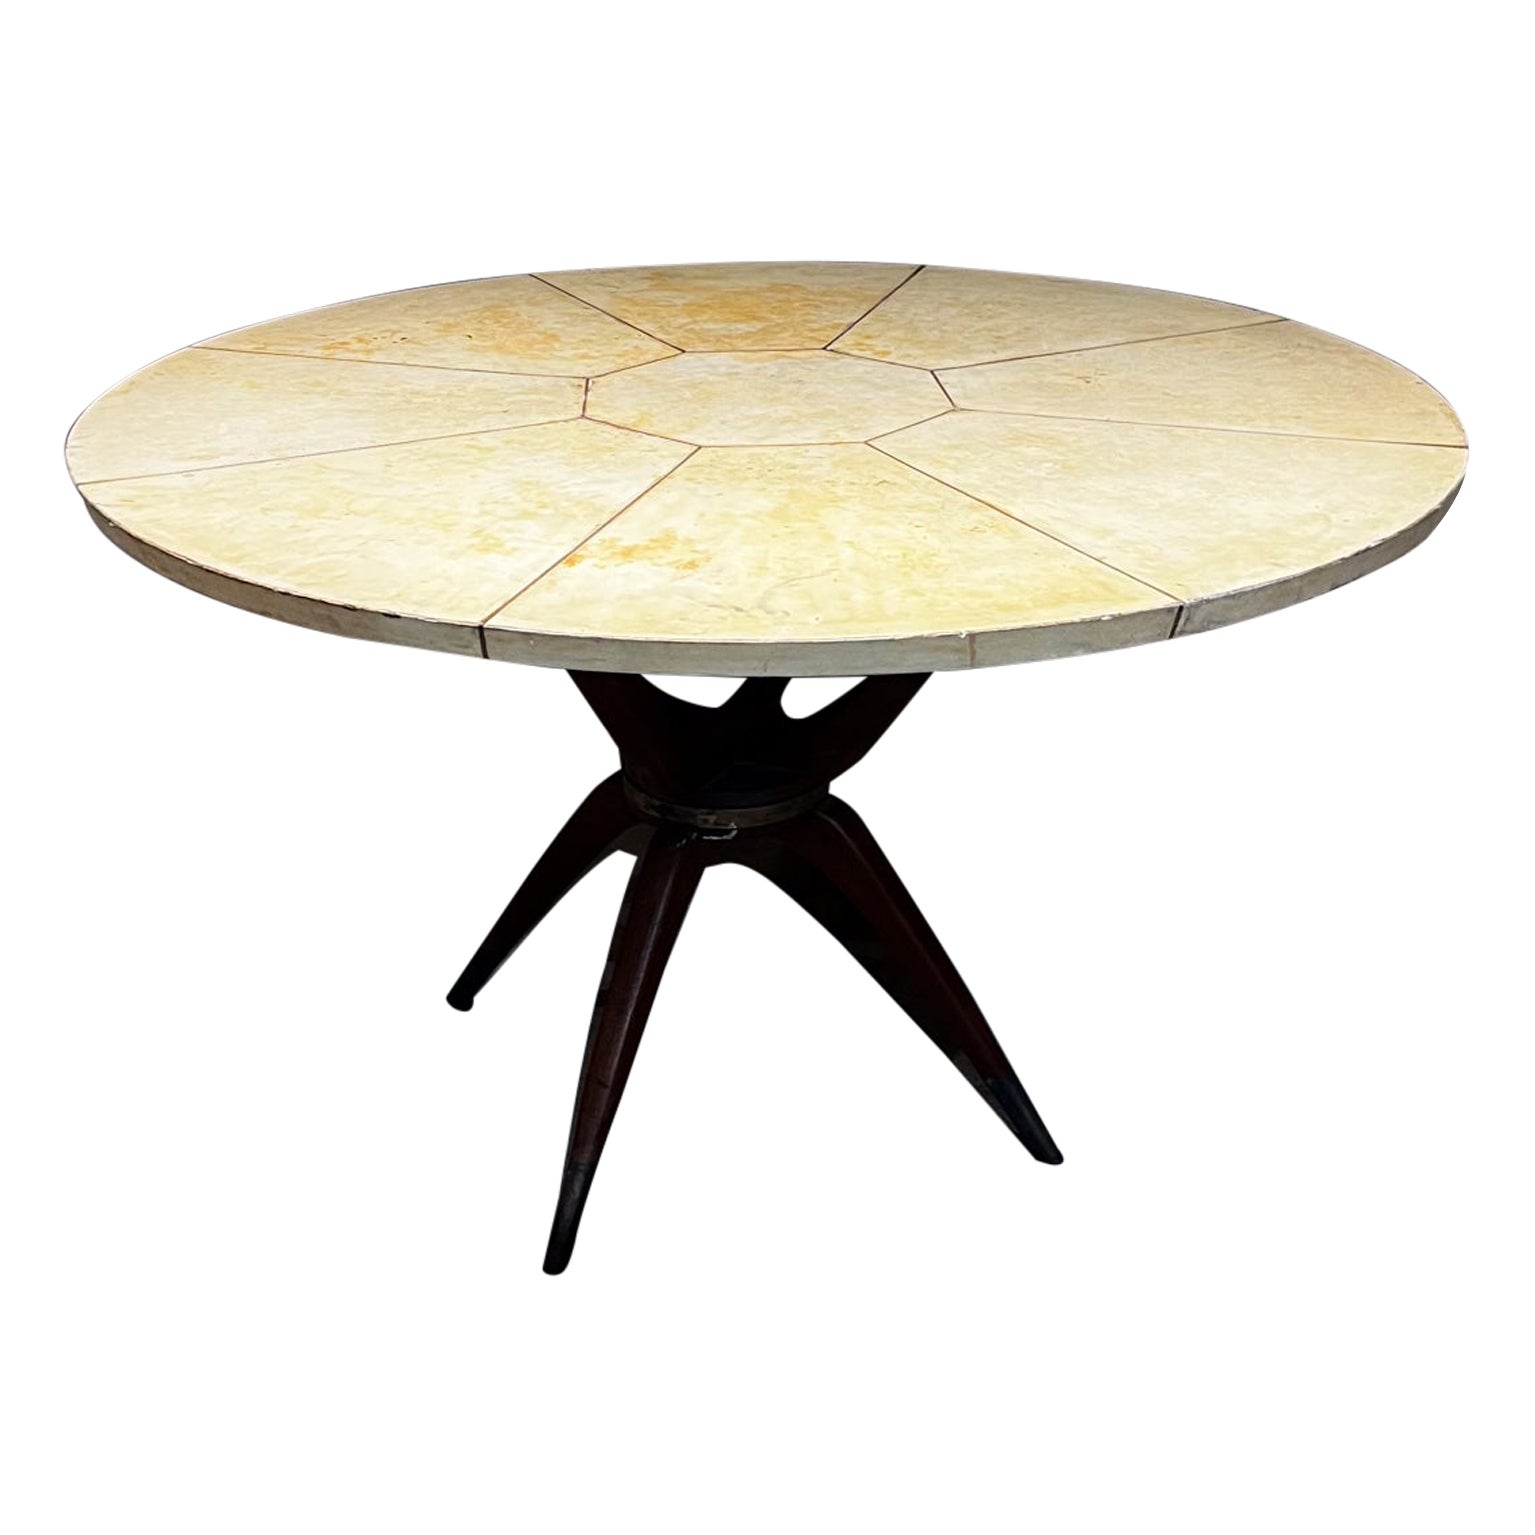 1950s Splendid Dining Table in goatskin, mahogany & patinated brass
made in Mexico
Mexican modernism, inspired by Italian design.
Unmarked. Attributed Arturo Pani.
28.25 h x 47.5 diameter
Original unrestored vintage condition with vintage